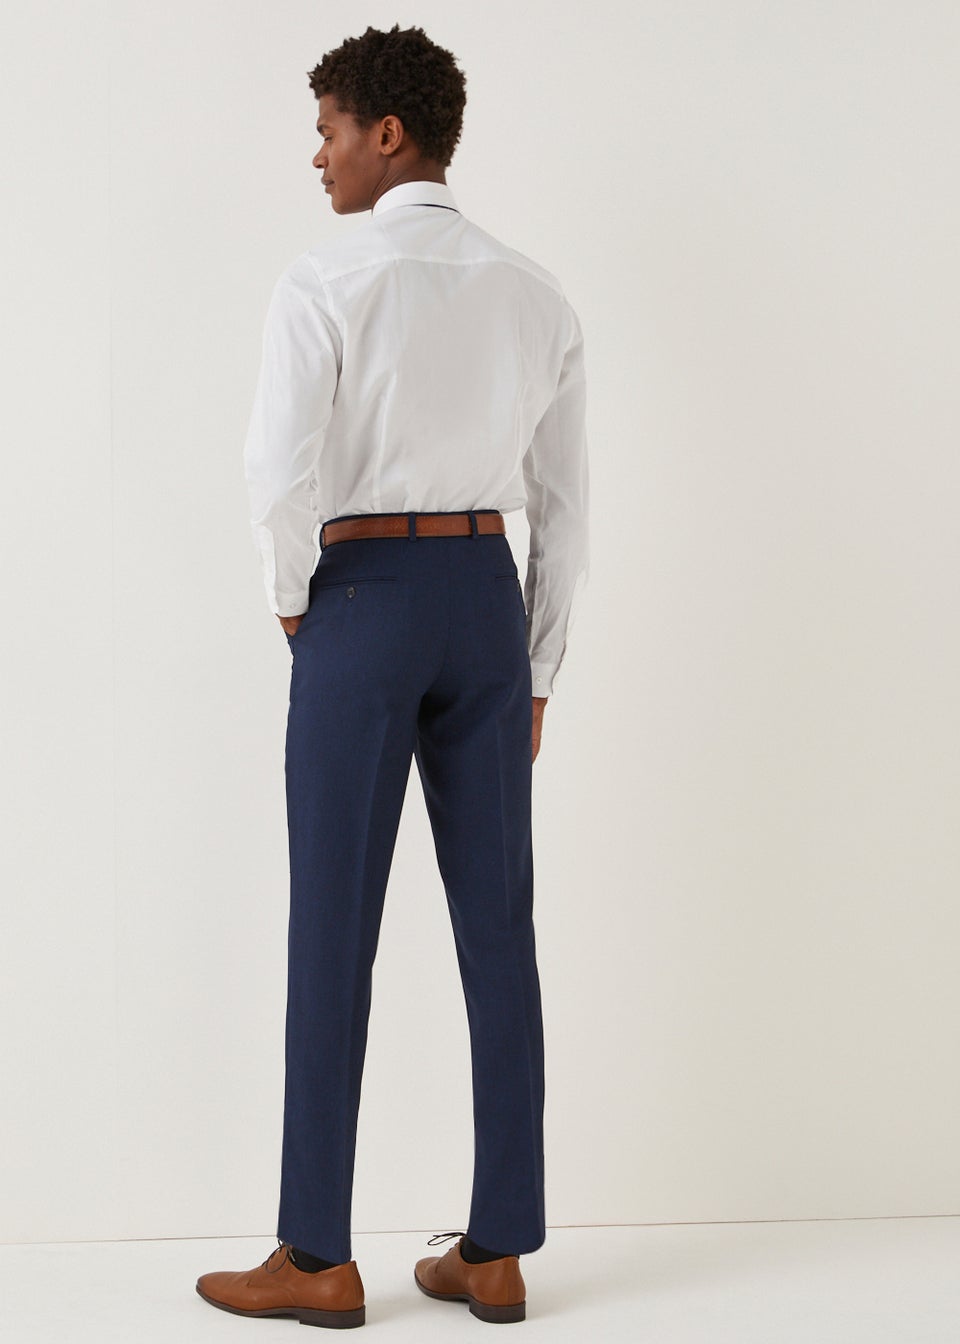 Taylor & Wright Bristol Navy Slim Fit Suit Trousers - Matalan